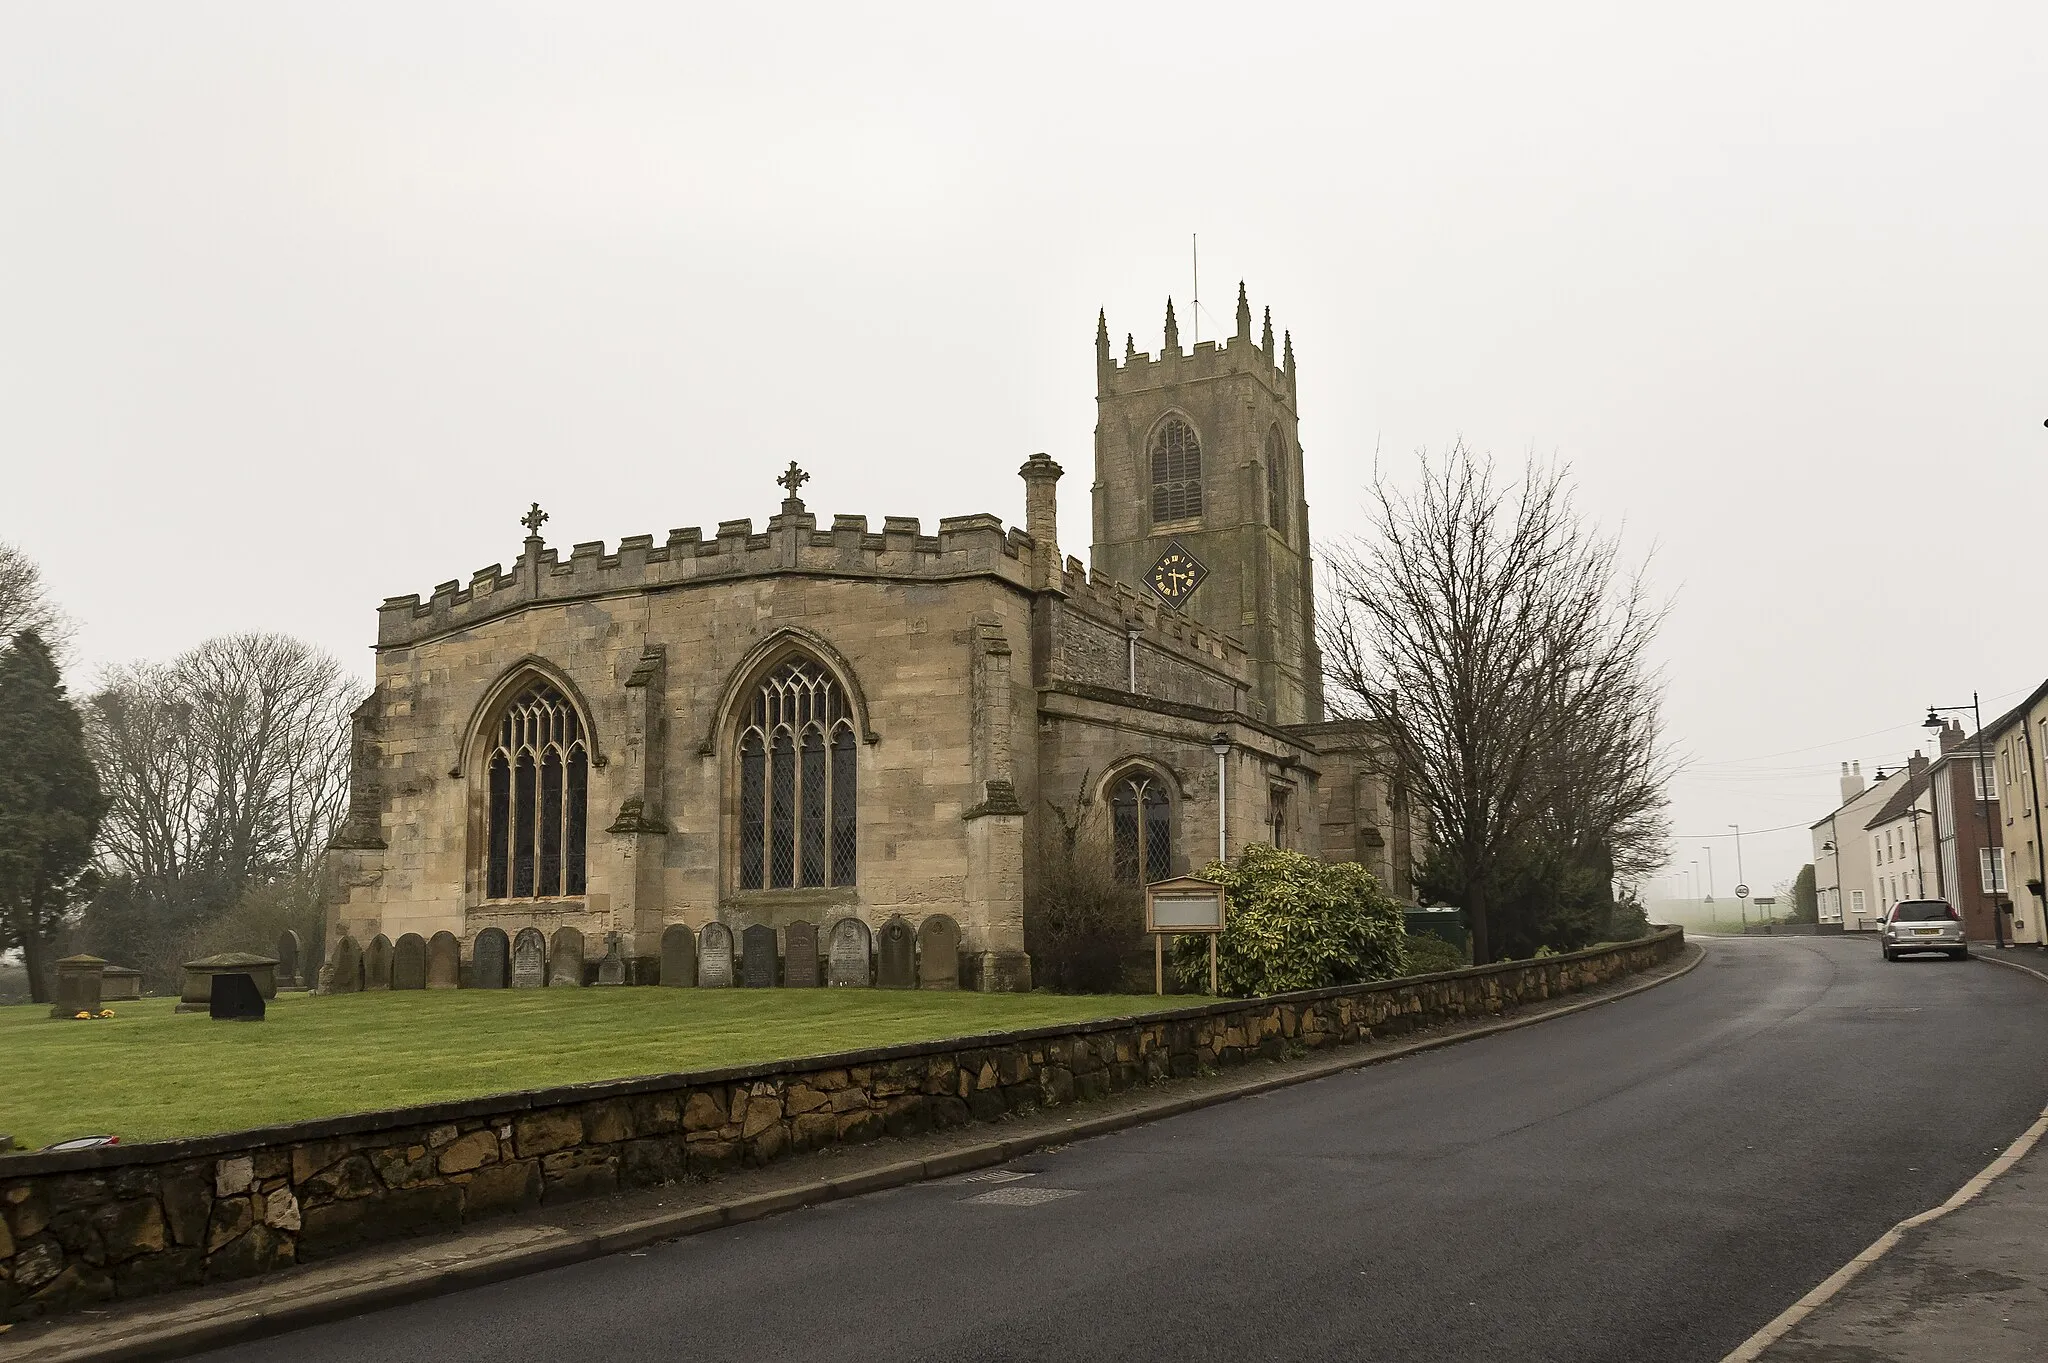 Photo showing: Grade I listed
The church dates from the twelfth century onwards, having a Norman four bay north arcade with round piers, scalloped capitals and square abaci.
There is a western tower, nave with north and south aisles and clerestory, a transeptal chapel, now a vestry, three bay chancel with north chapel, and north and south porches.
The tower is perpendicular with four stages and an embattled parapet with eight crocketted pinnacles. There are six bells, and a carillon which plays three hymn tunes.
The nave has a four bay north aisle, a five bay south aisle, and clerestory with three light windows. Most of the glass in the church is clear.
The nave has a low pitched roof with bosses. There is a fifteenth century octagonal font with trefoil panels.
In the north chapel, there is a fifteenth century effigy of a priest near the wall.
The chancel has a four light east window with prayer boards either side, and blind arcading with textured tiles.
The east end of the chancel and chapel were rebuilt in the mid eighteenth century, and again in the mid nineteenth century. There were also restorations from 1895 to 1903 by Prothero.

There is a two manual organ on the north side of the chancel.